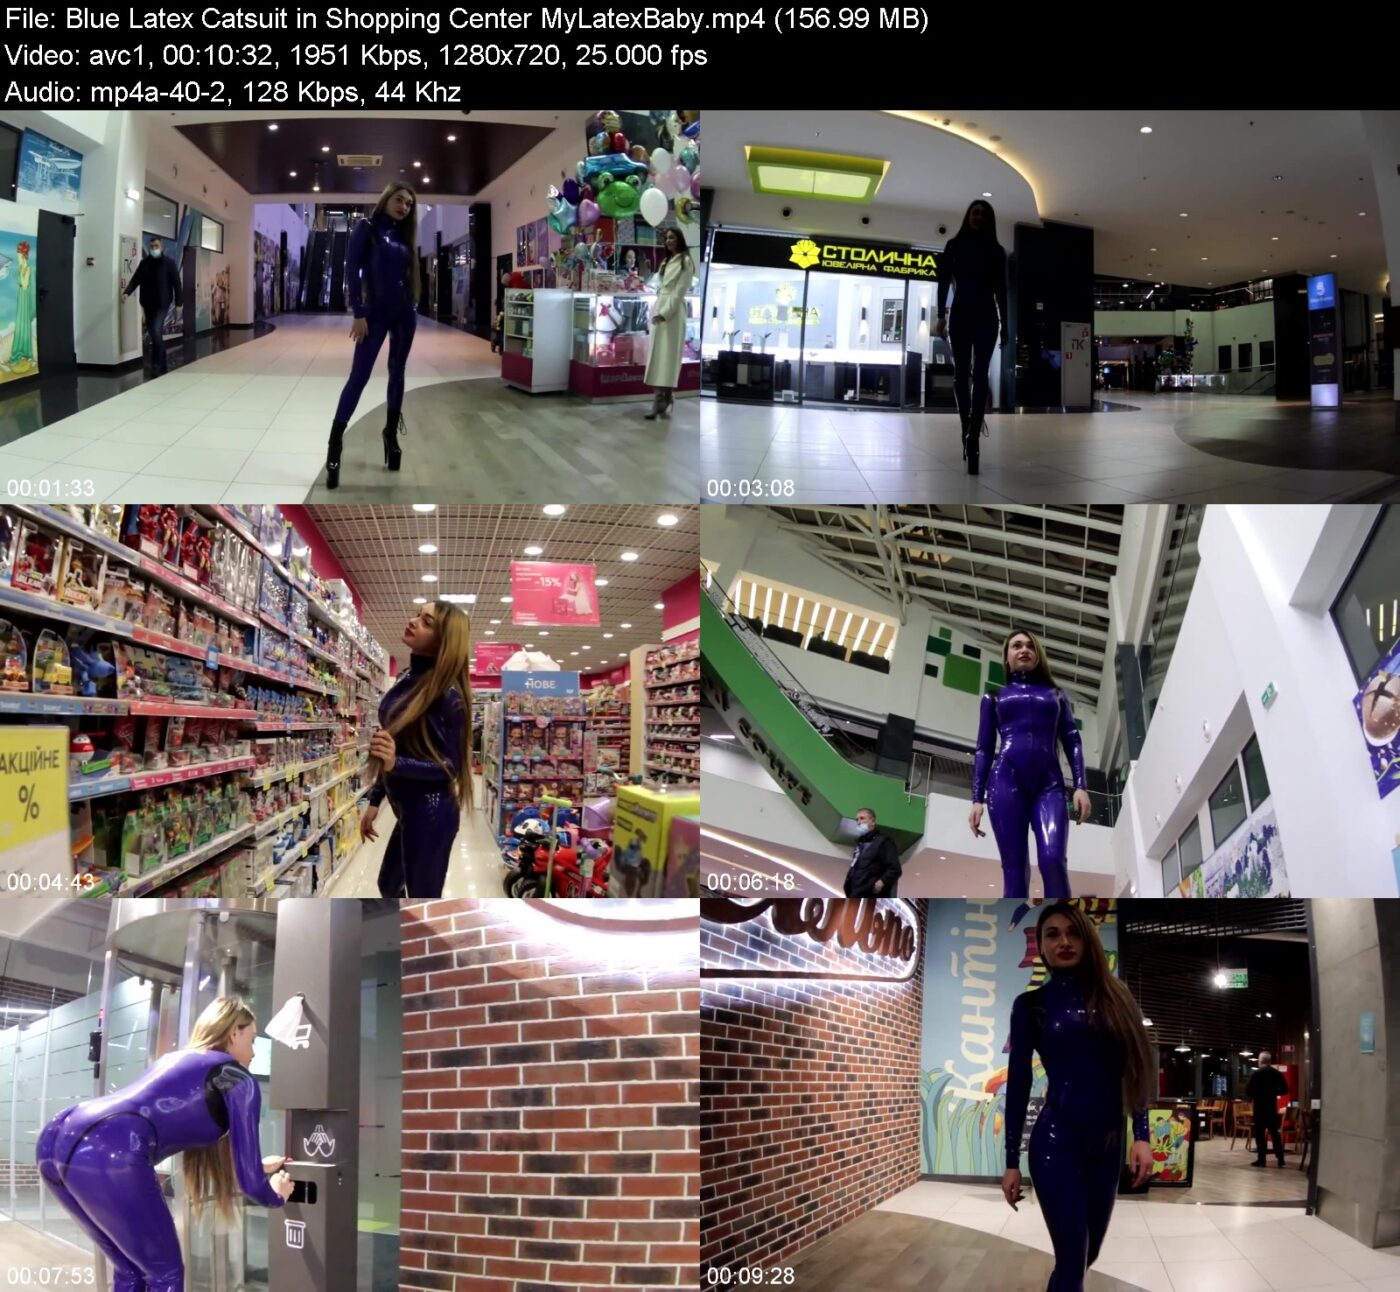 Blue Latex Catsuit in Shopping Center MyLatexBaby